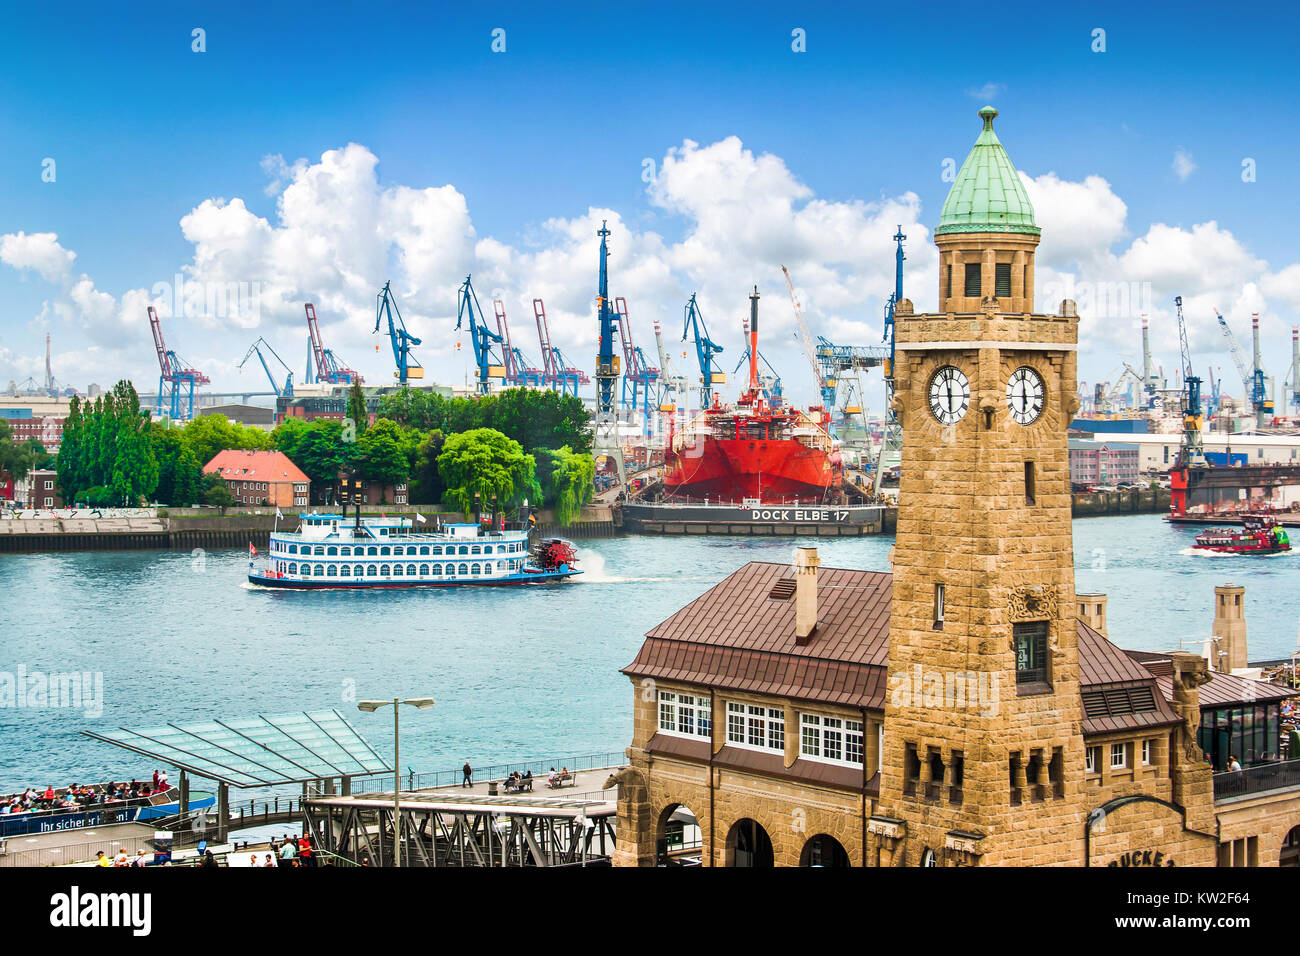 Famous Hamburger Landungsbruecken with harbor and traditional paddle steamer on Elbe river, St. Pauli district, Hamburg, Germany Stock Photo